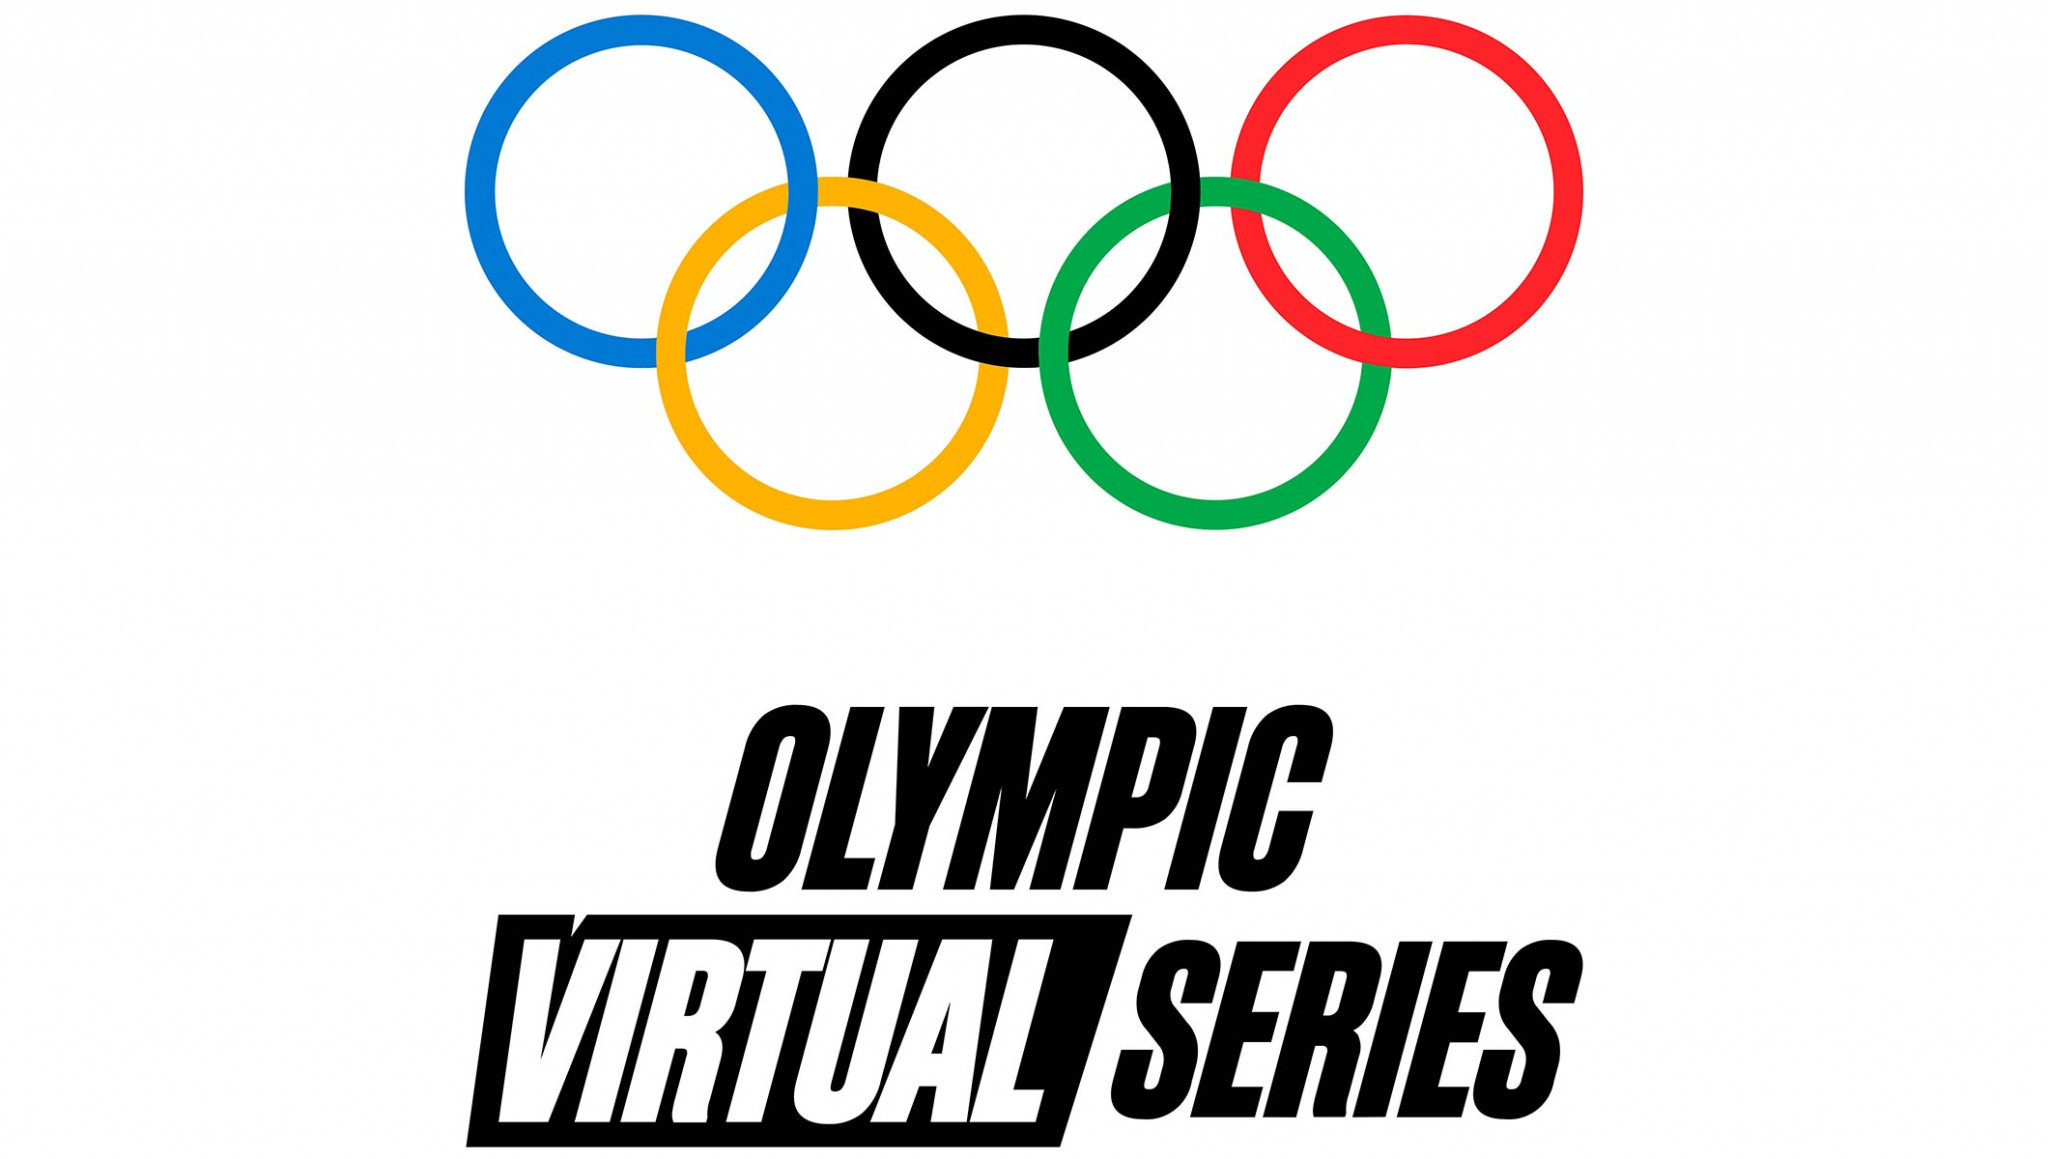 The IOC has launched the Olympic Virtual Series ©IOC